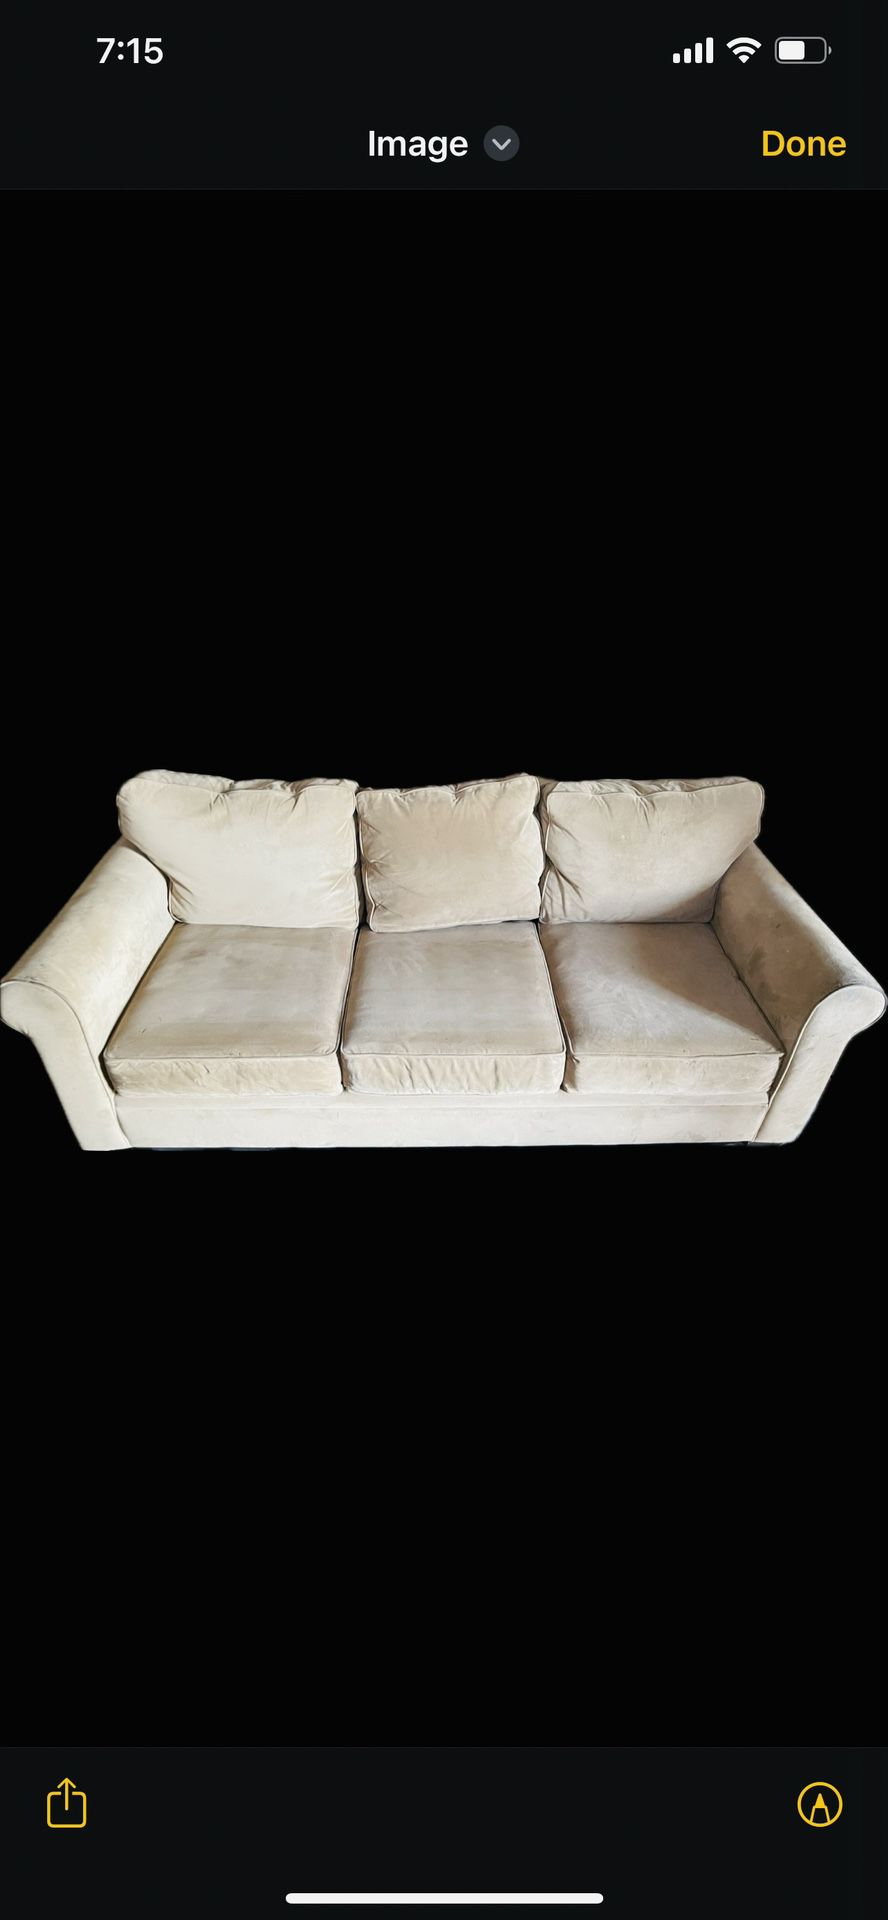 Tan Couch 